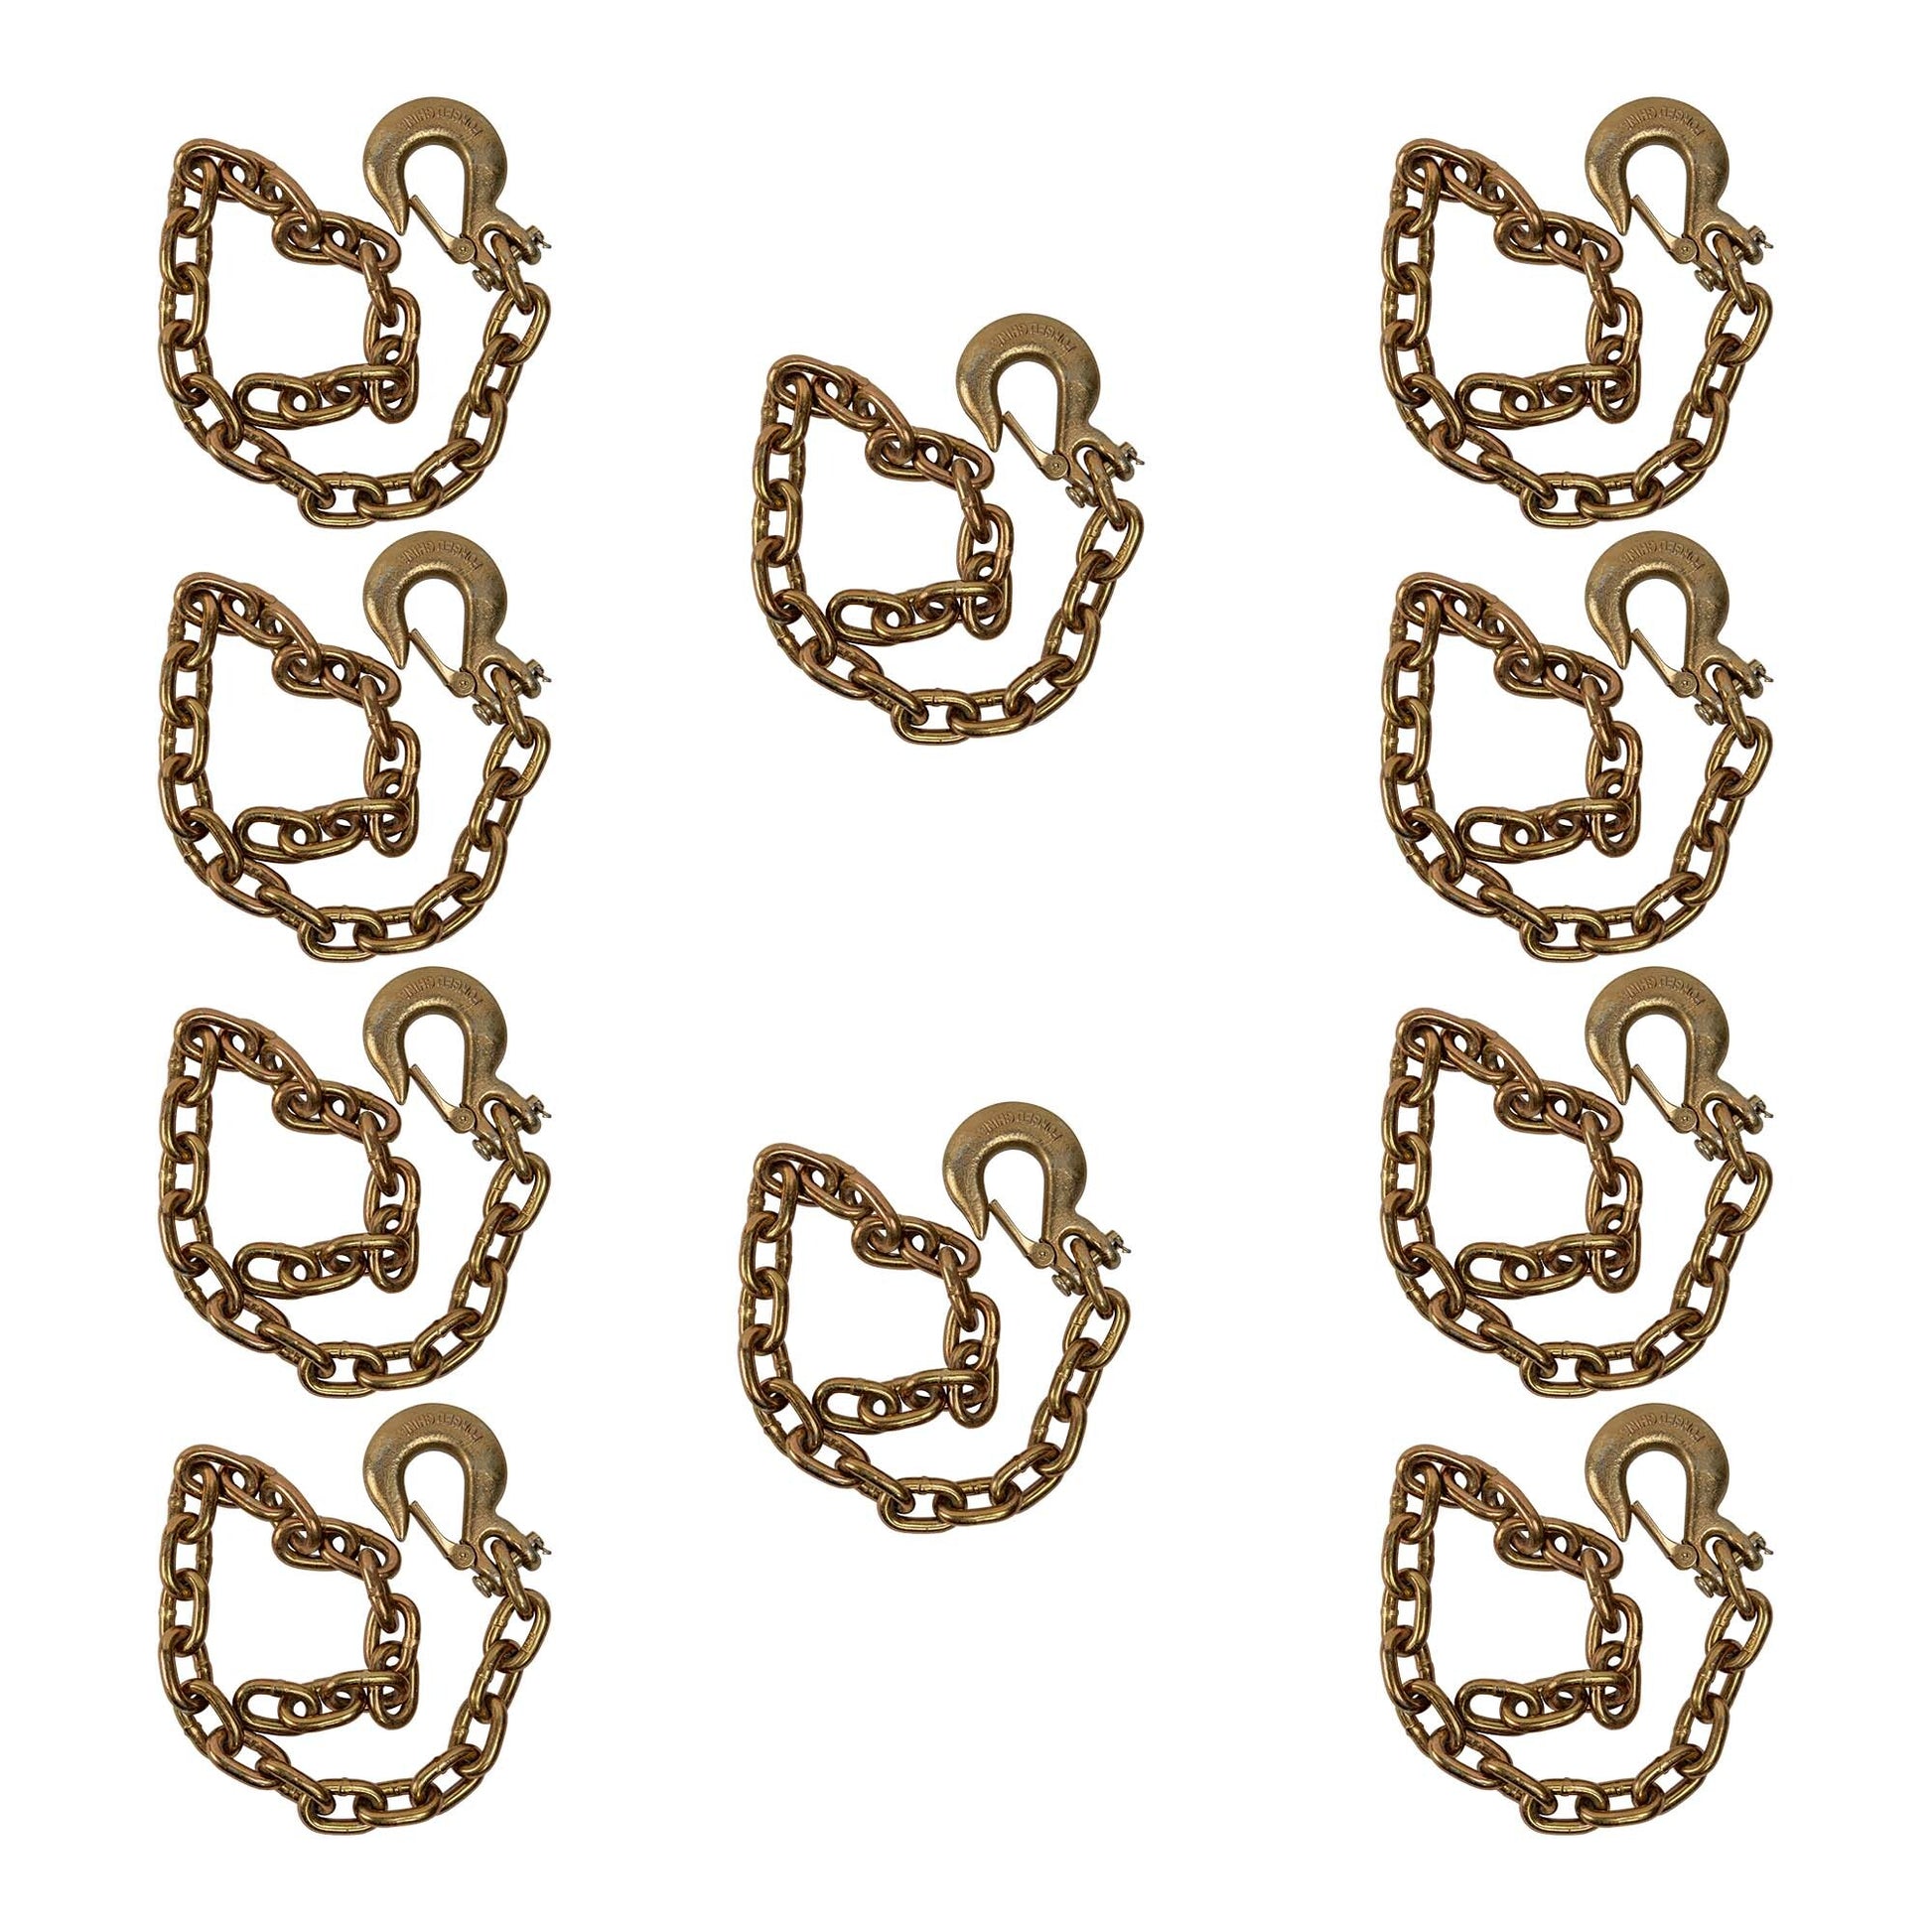 Gold Trailer Safety Chain - 3/8 x 39" with 1 Clevis Hook (27.4k Capacity) - The Trailer Parts Outlet